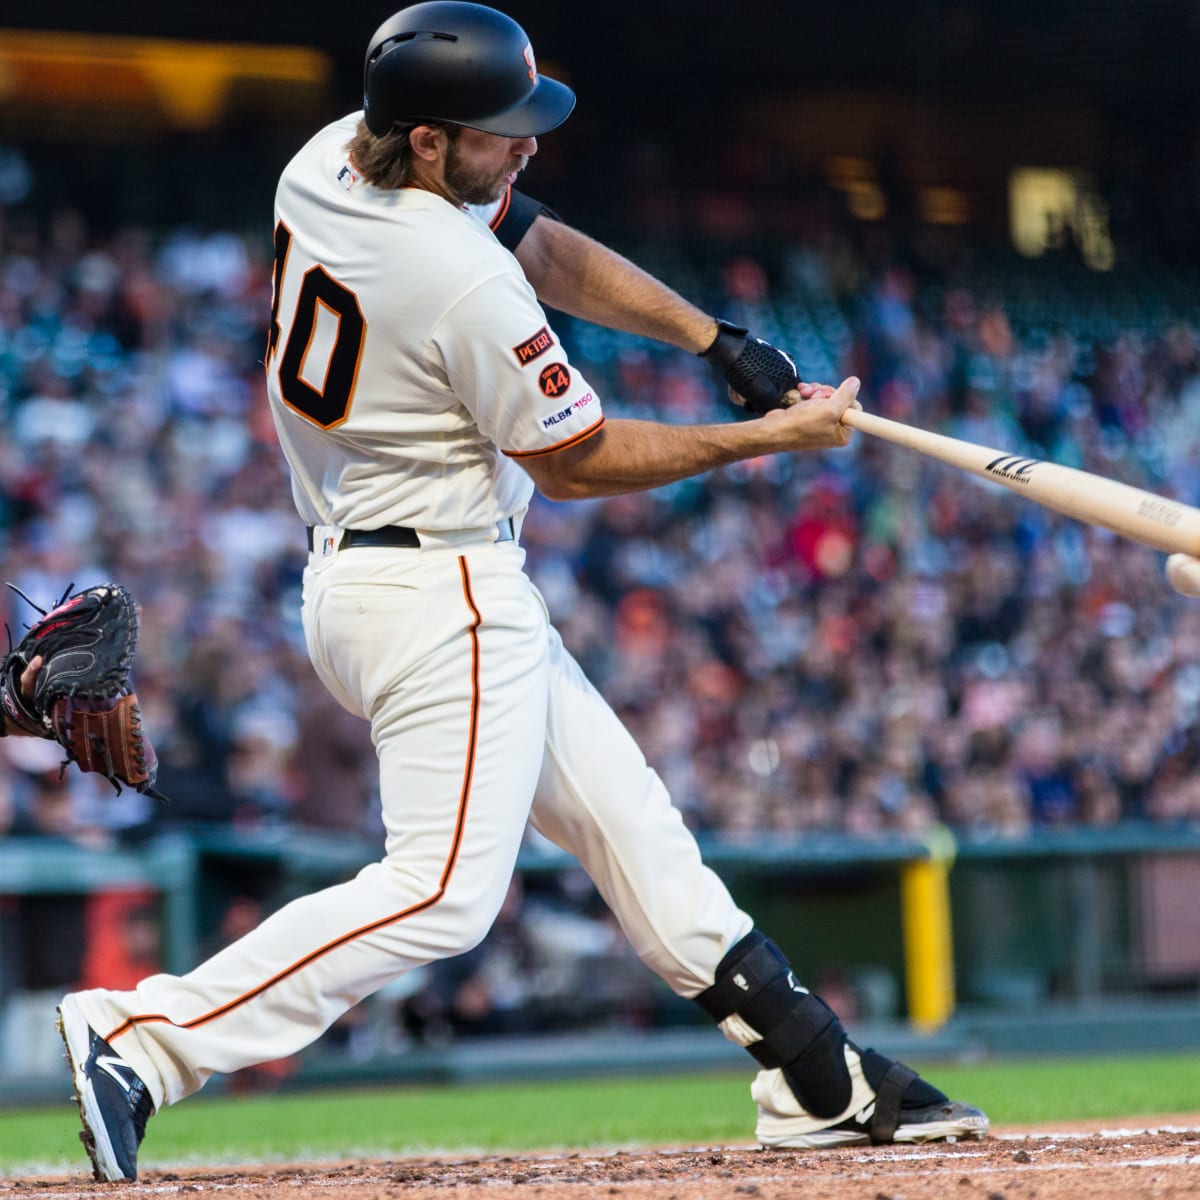 SF Giants milb coach compares prospect to Madison Bumgarner